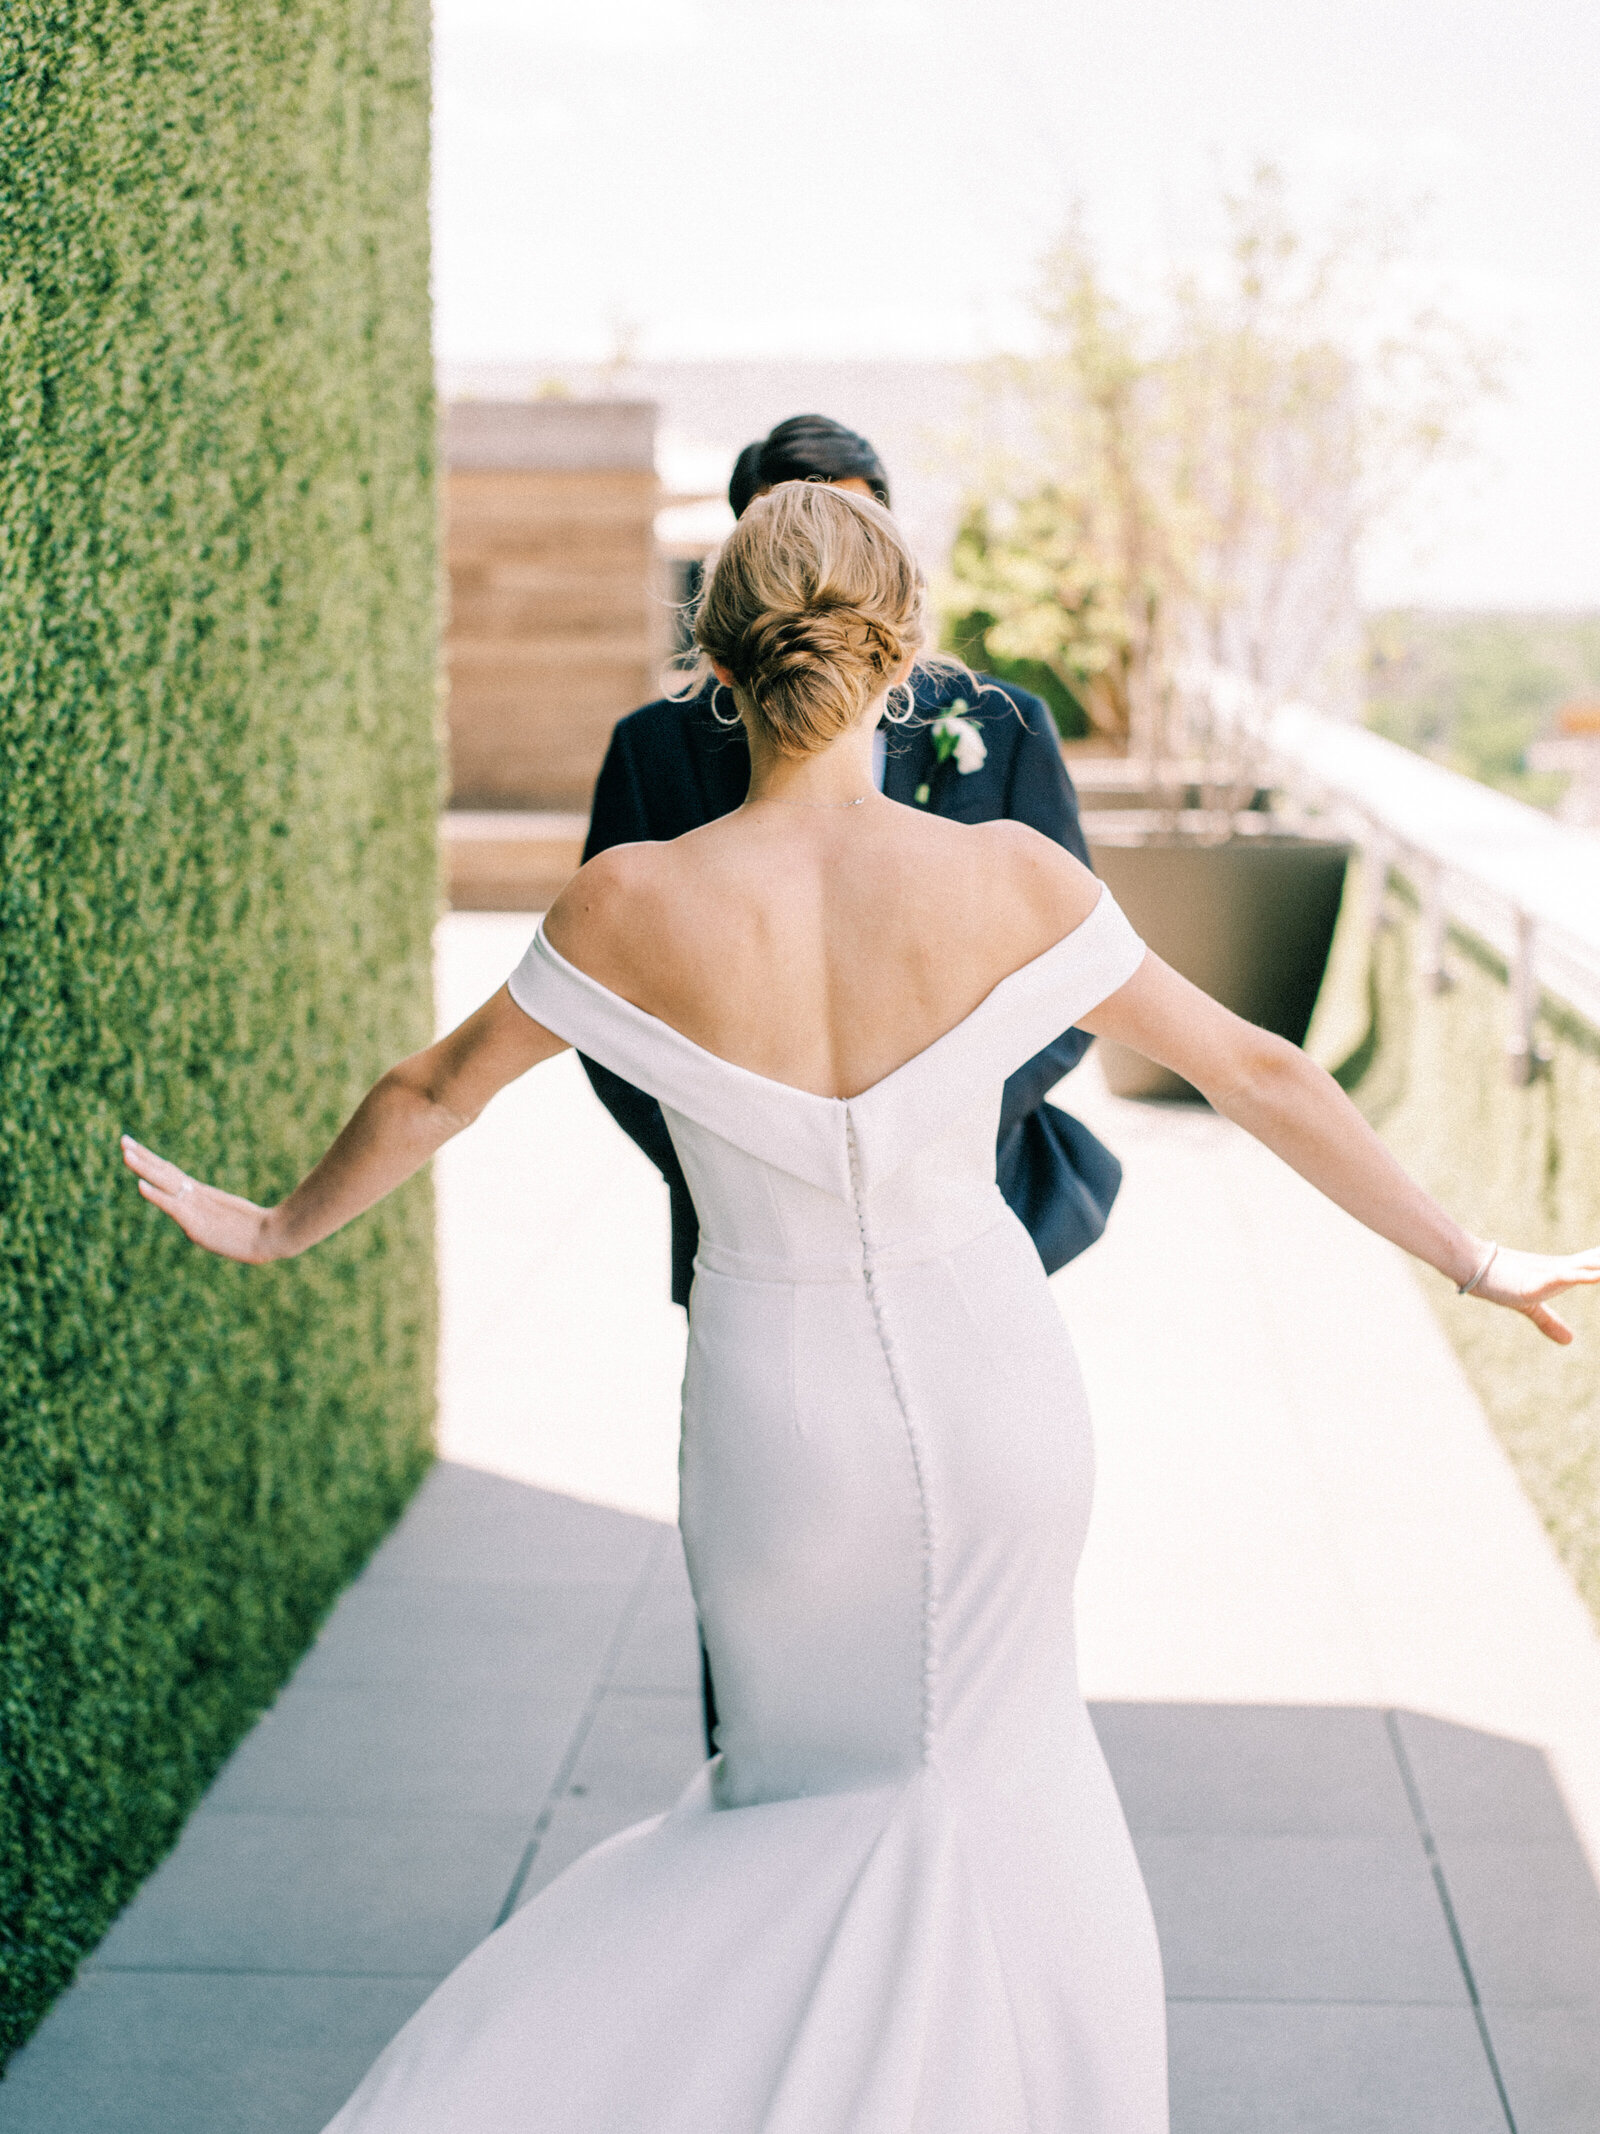 067-sean-cook-wedding-photography-chicago-first-look-rooftop